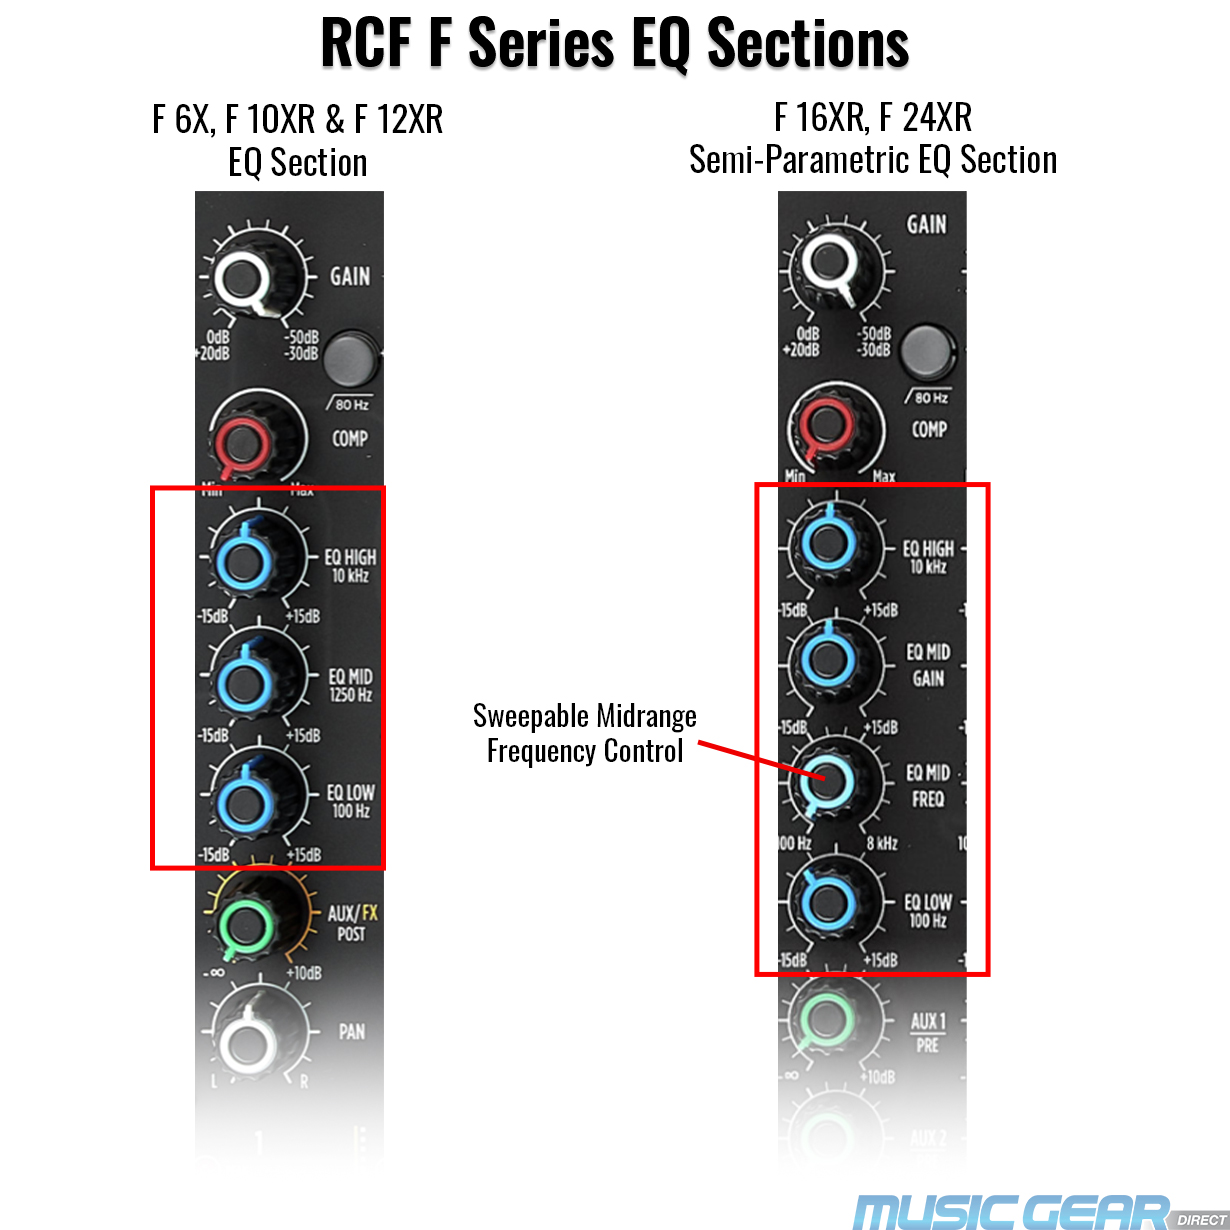 Comparison between RCF F Series EQ Sections